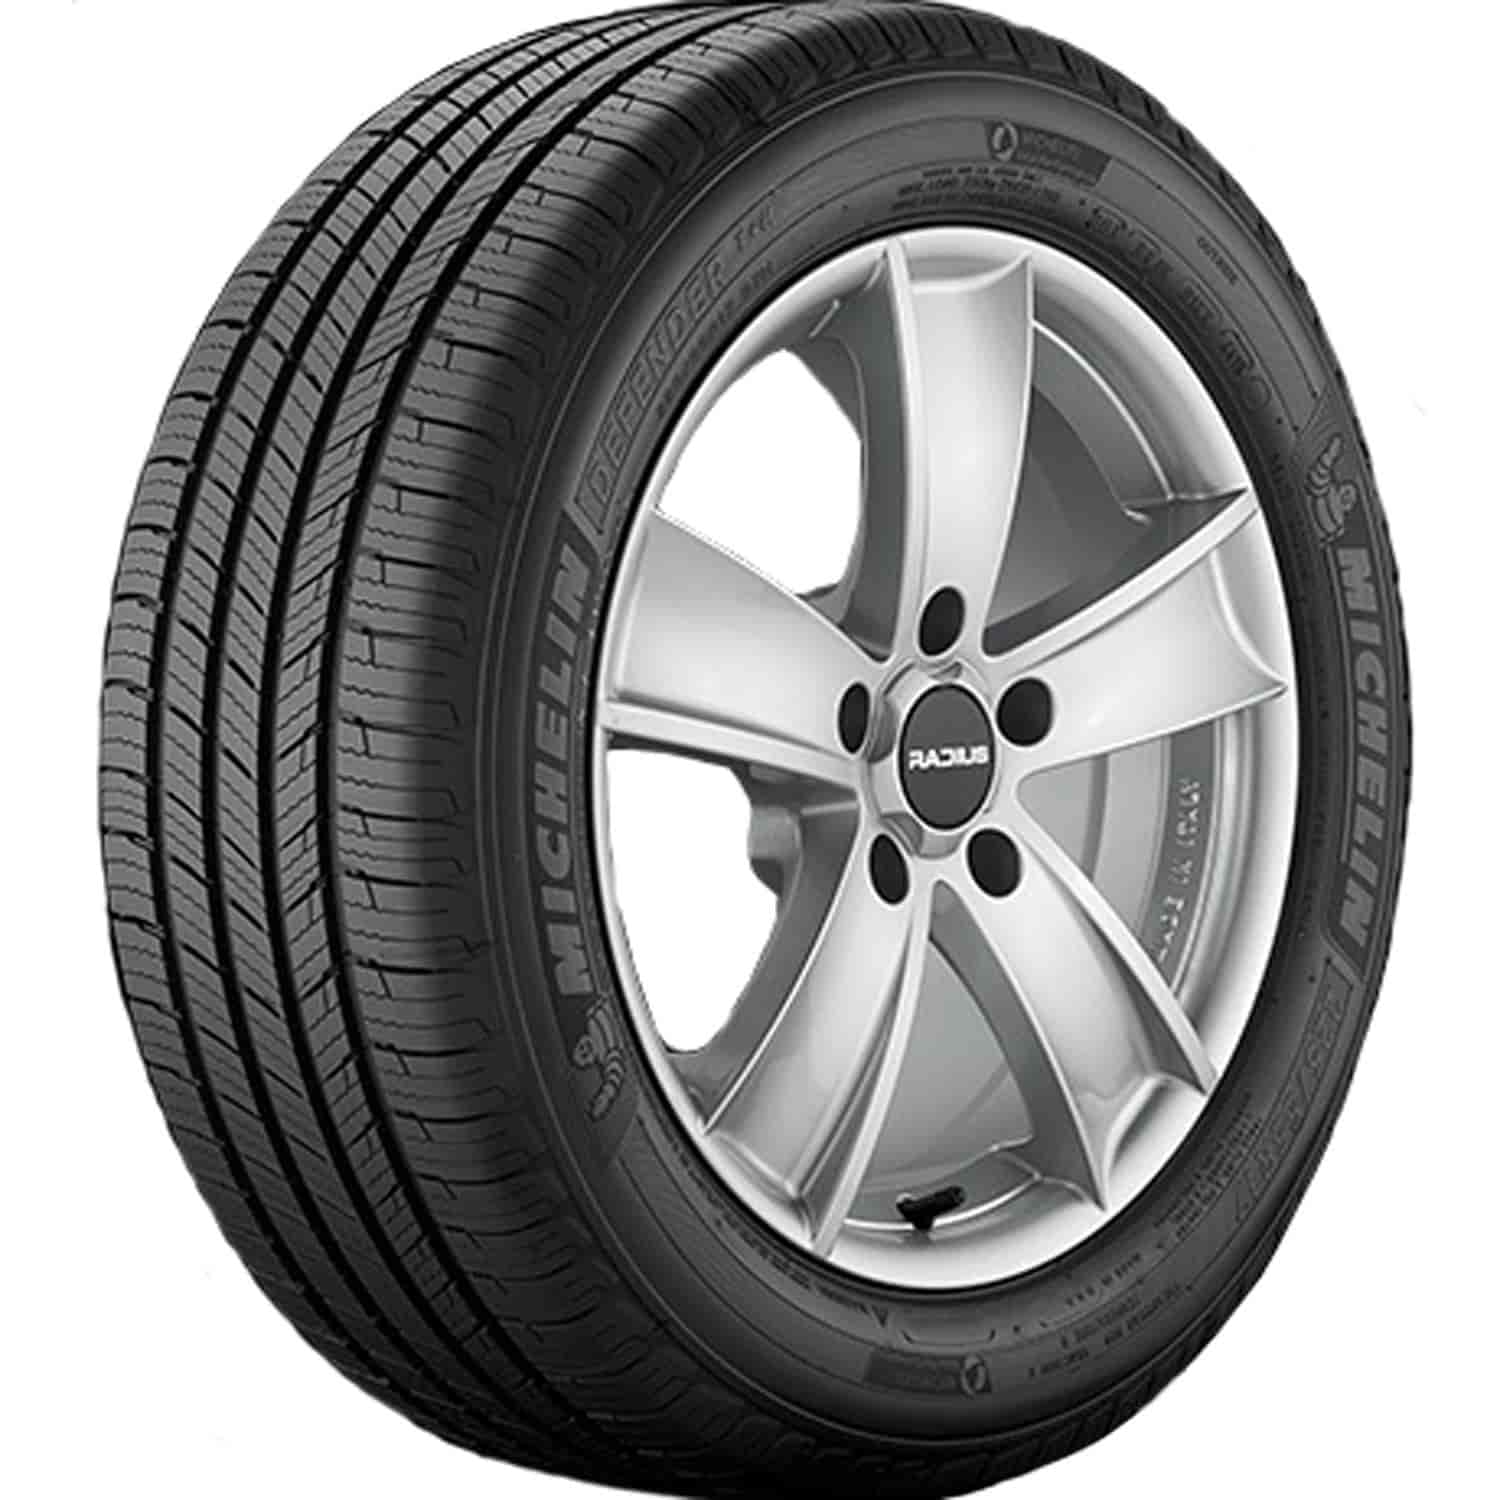 Defender T+H Tire Size:235/50R17